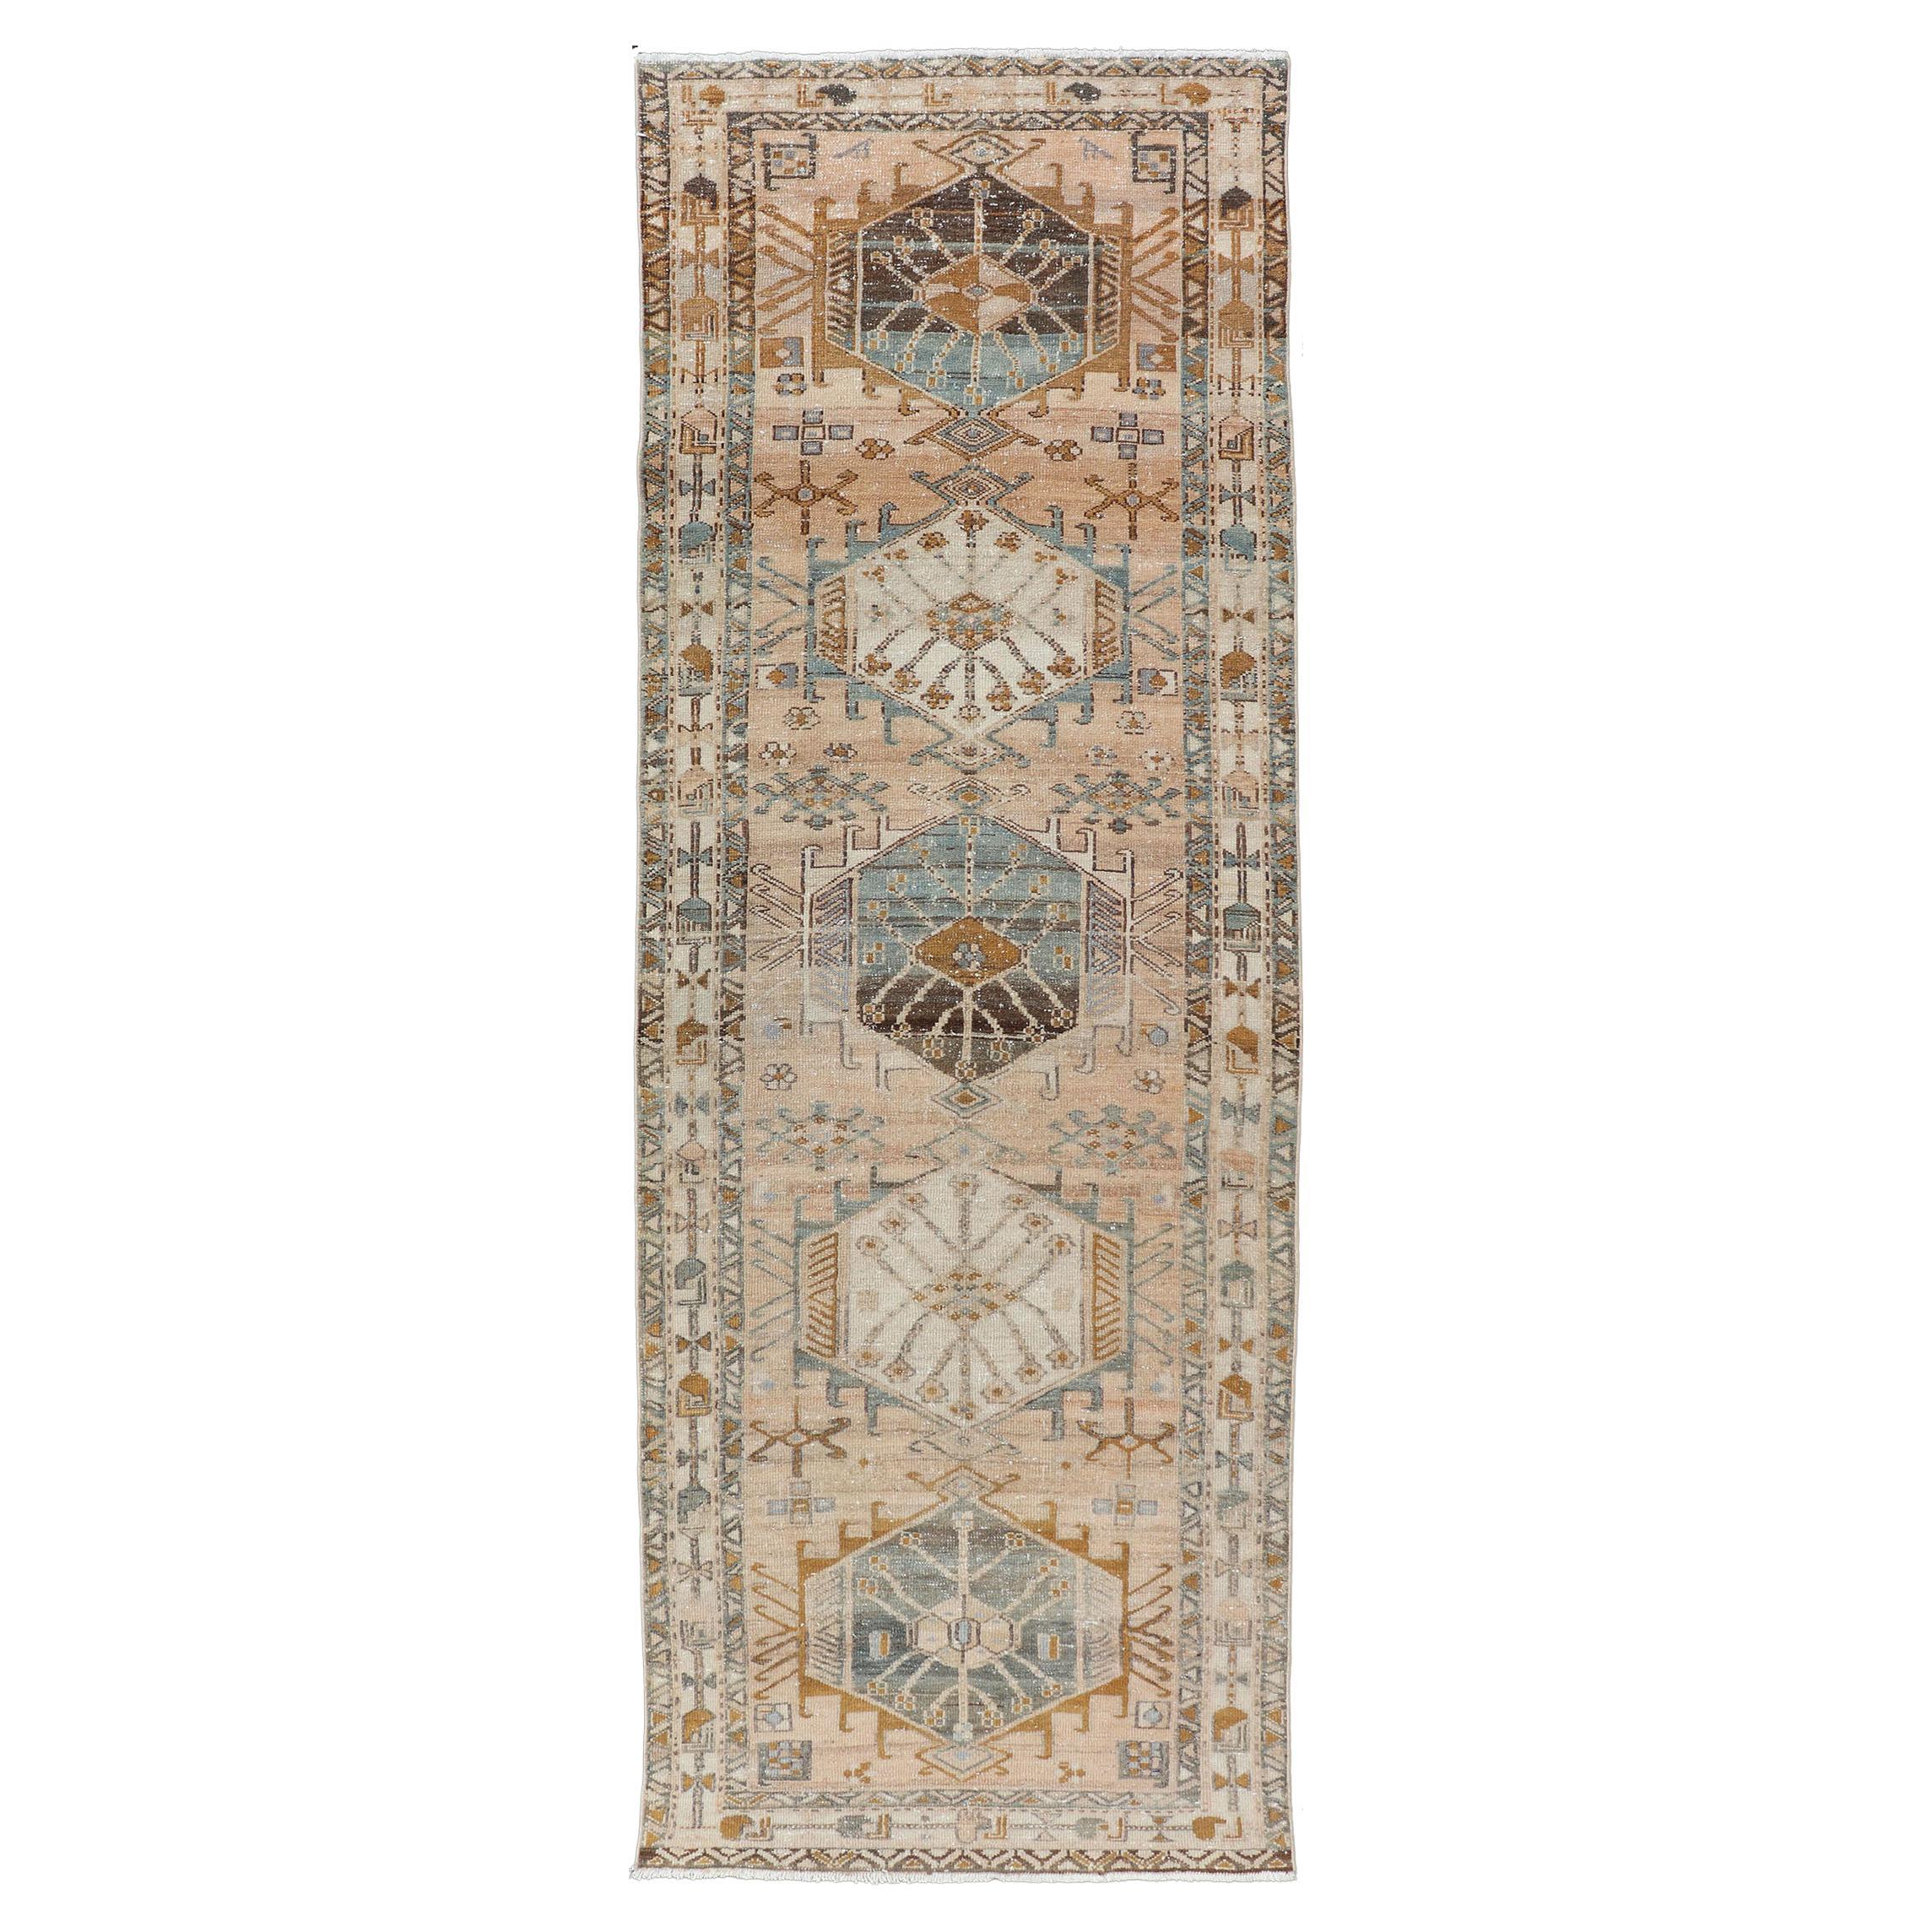 Multi Colored Antique Persian Heriz Runner with Geometric Medallions